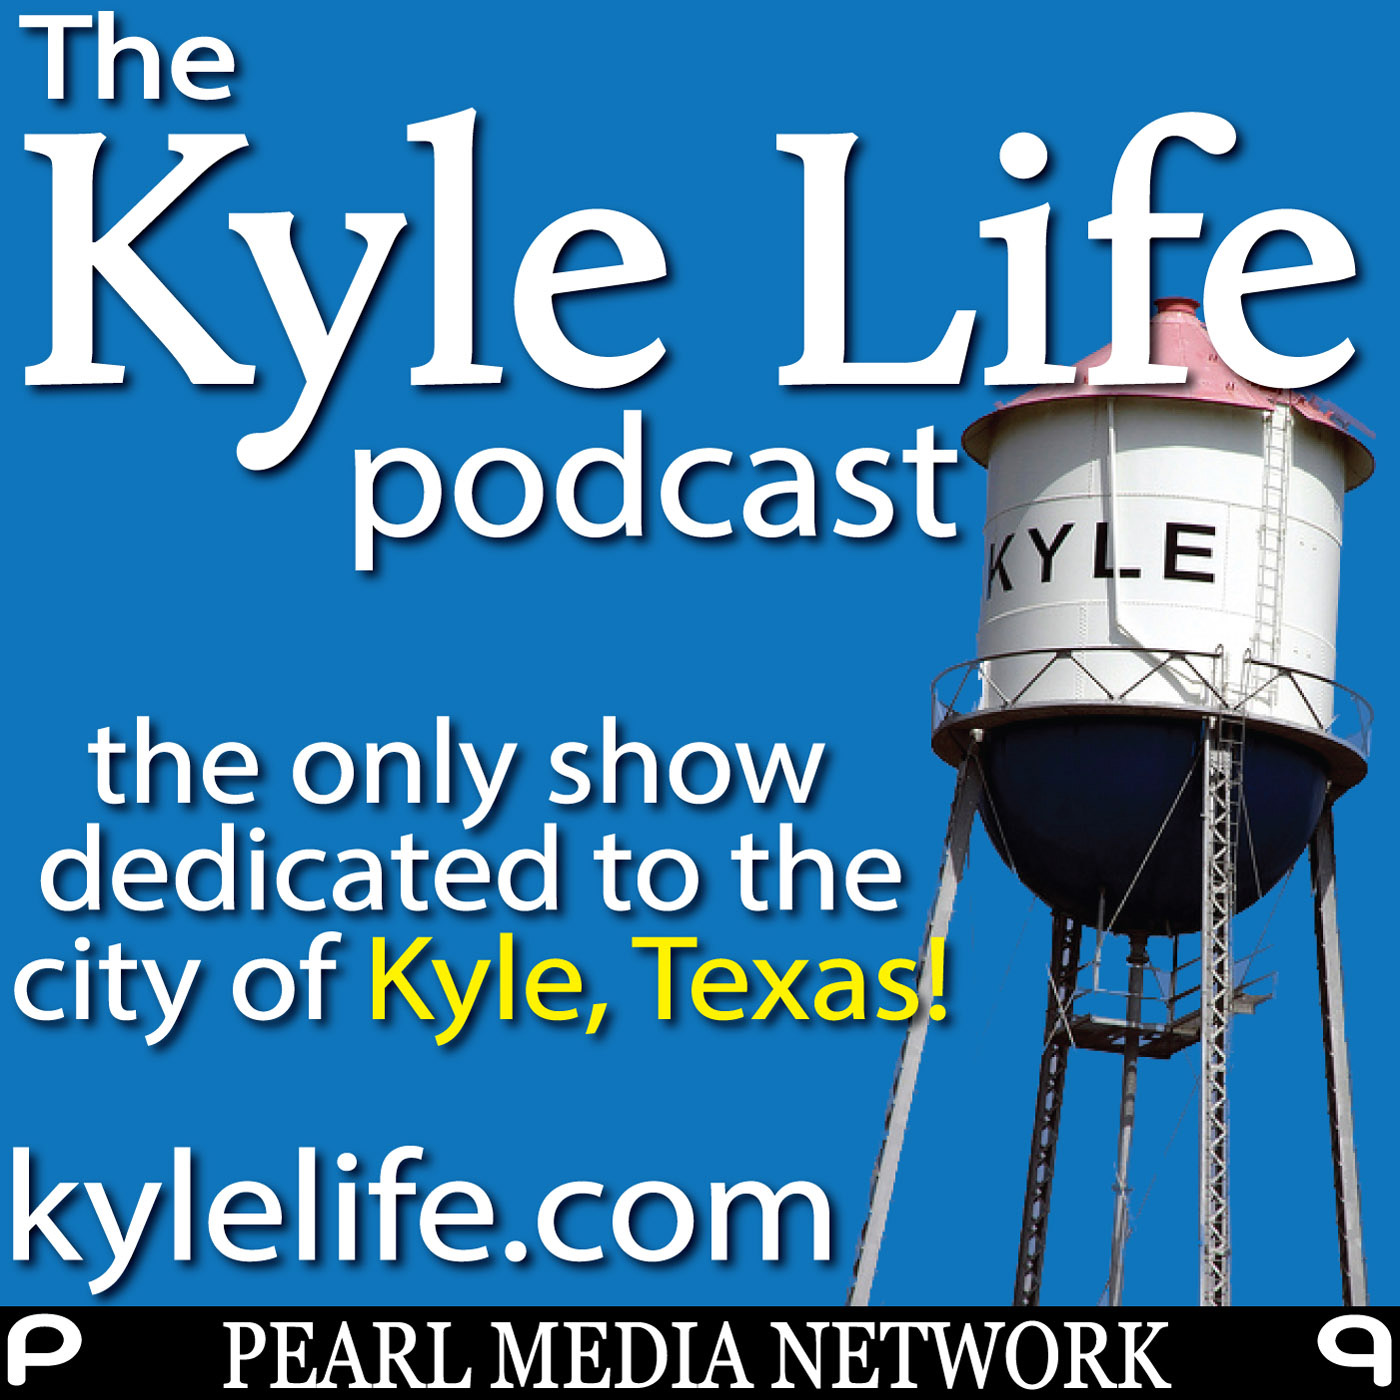 Coming soon to The Kyle Life Podcast